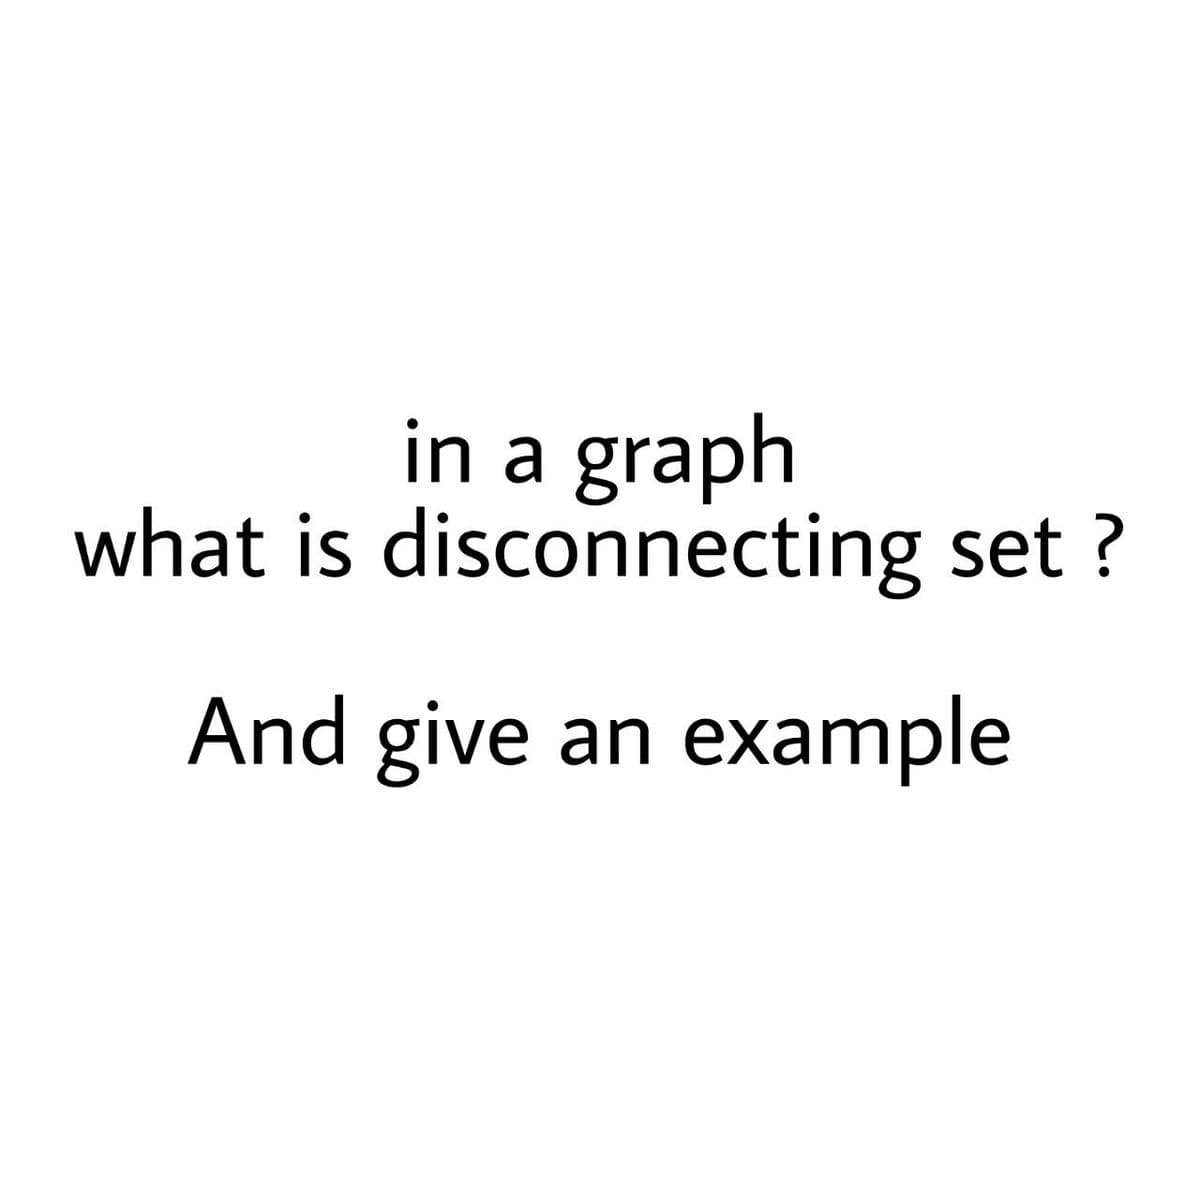 in a graph
what is disconnecting set ?
And give an example
